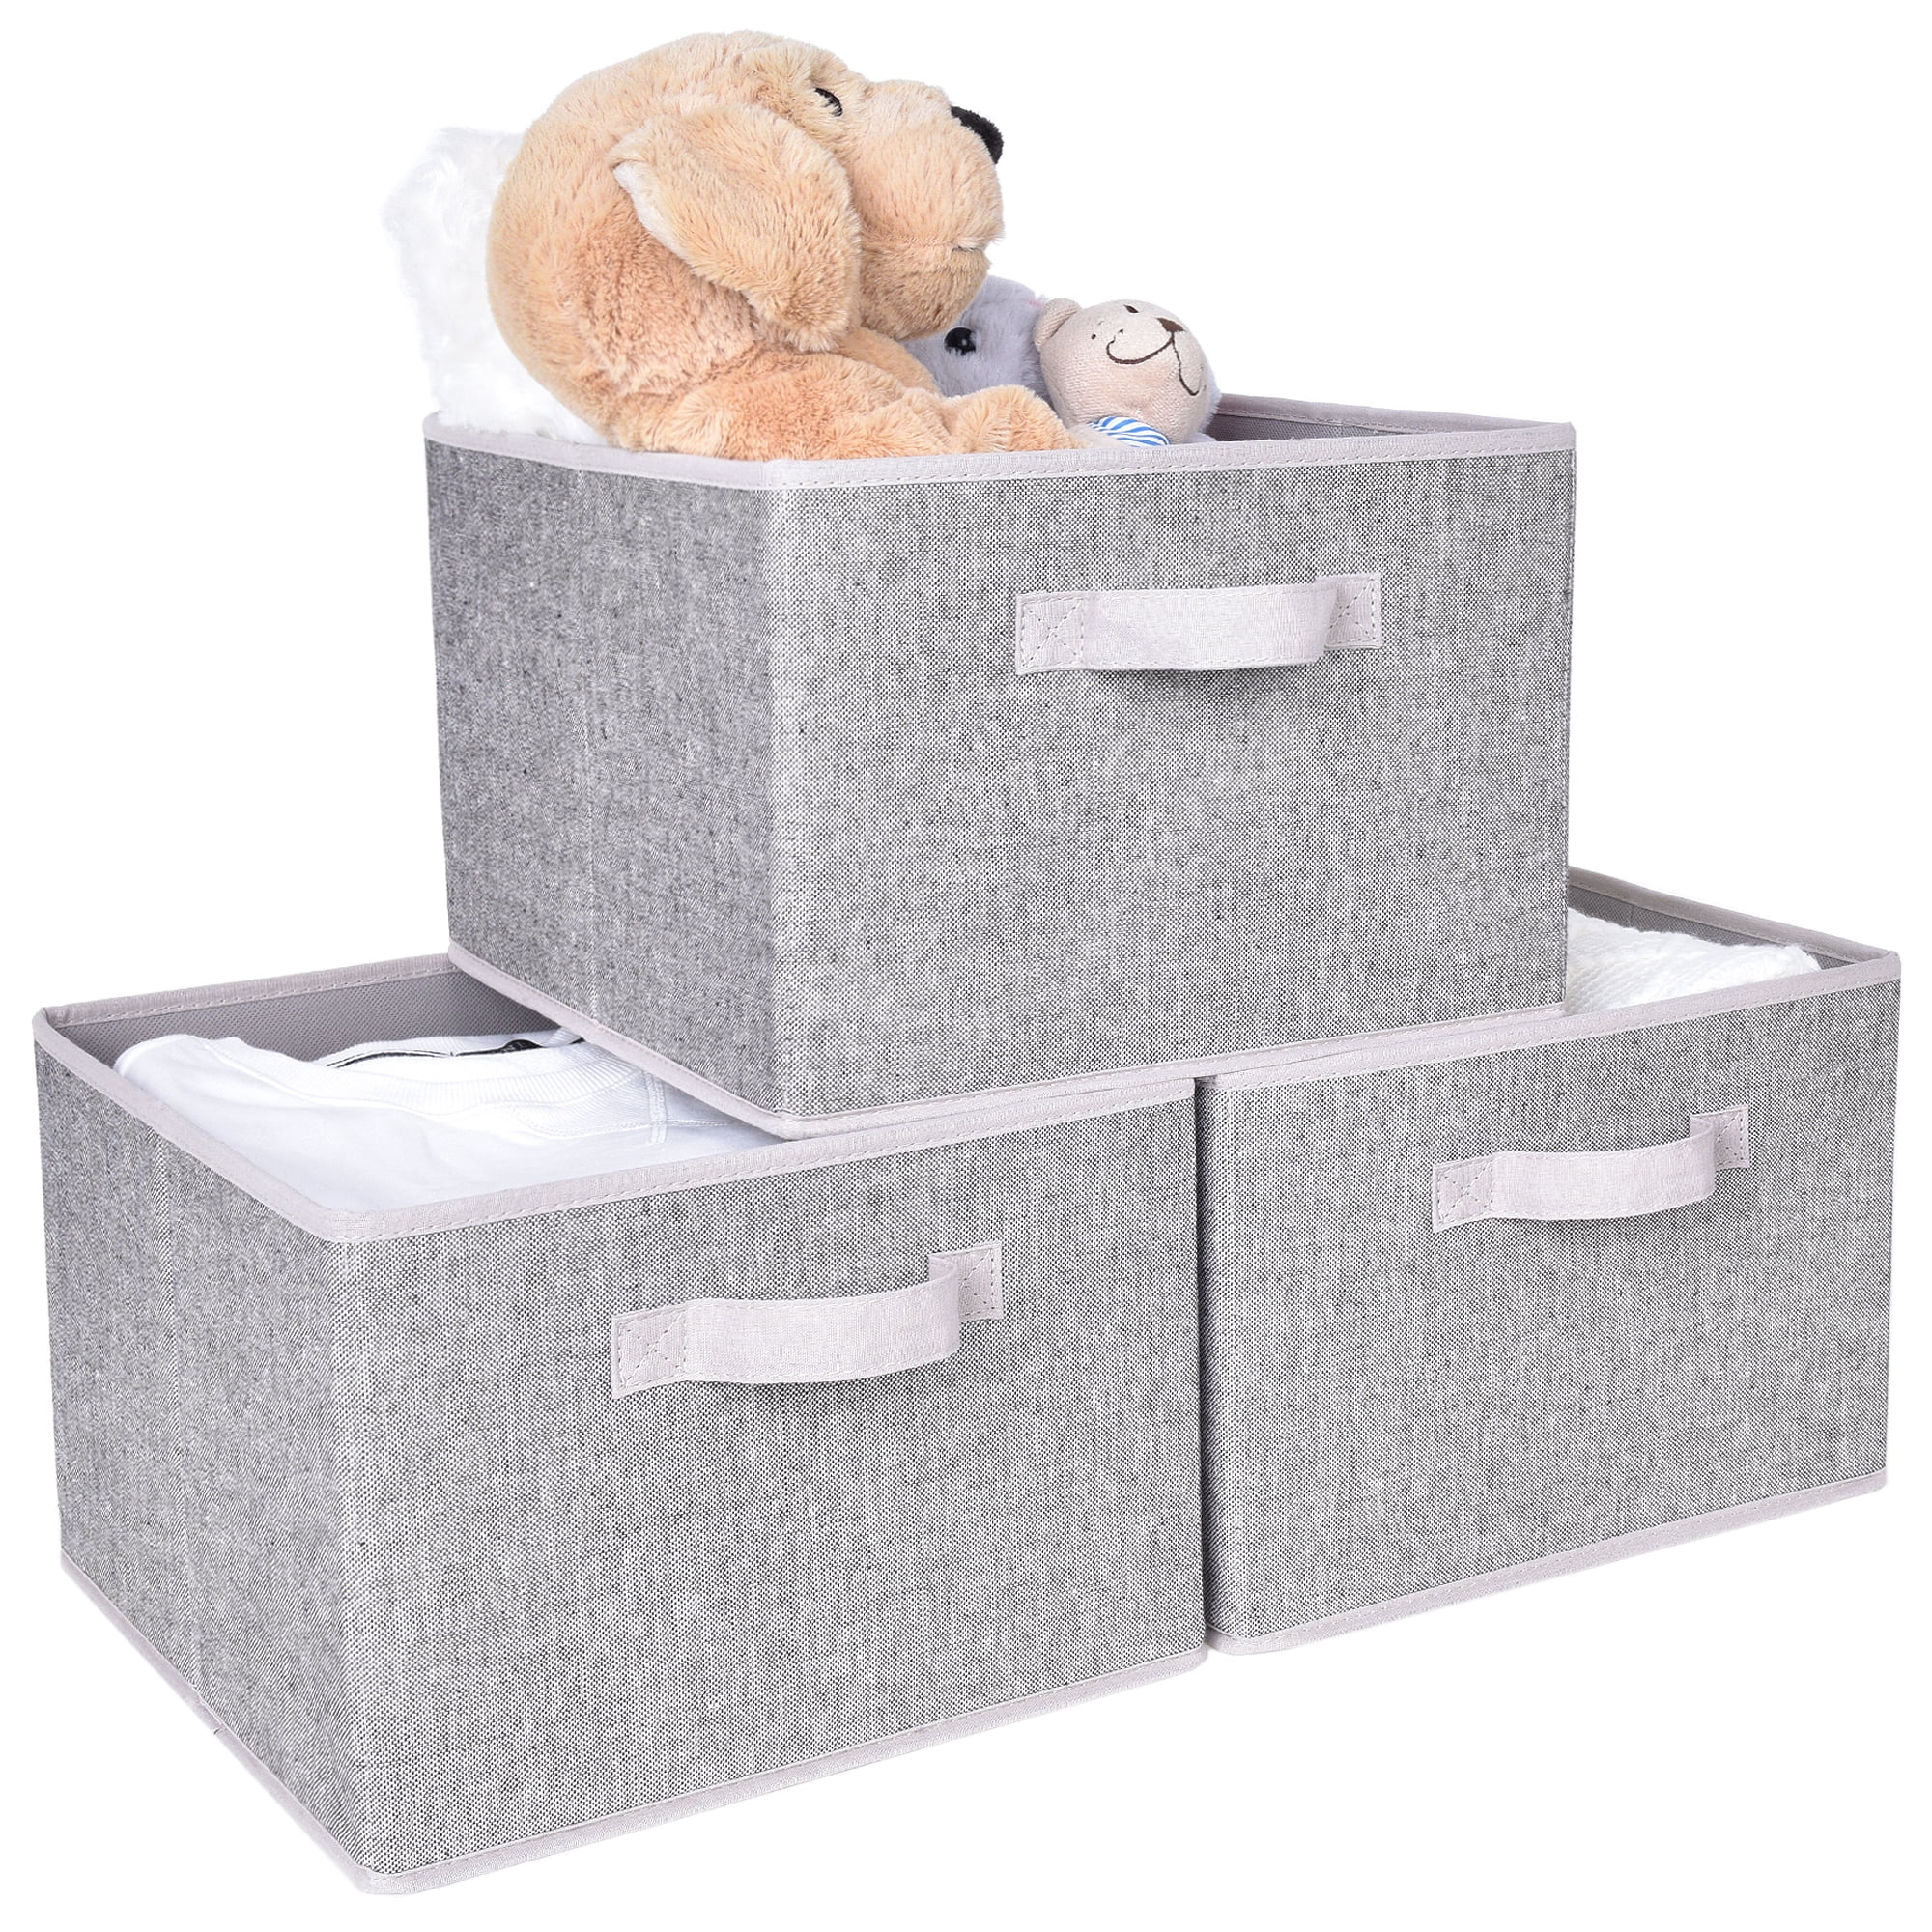 Large 17 42 Quarts Collapsible Stackable Storage Bins With Lids [3-Pack]  Foldable Fabric Linen Storage Boxes Cube, Closet Organizer Baskets With  Label For Home (16.7 X 12 X 12, Gray)